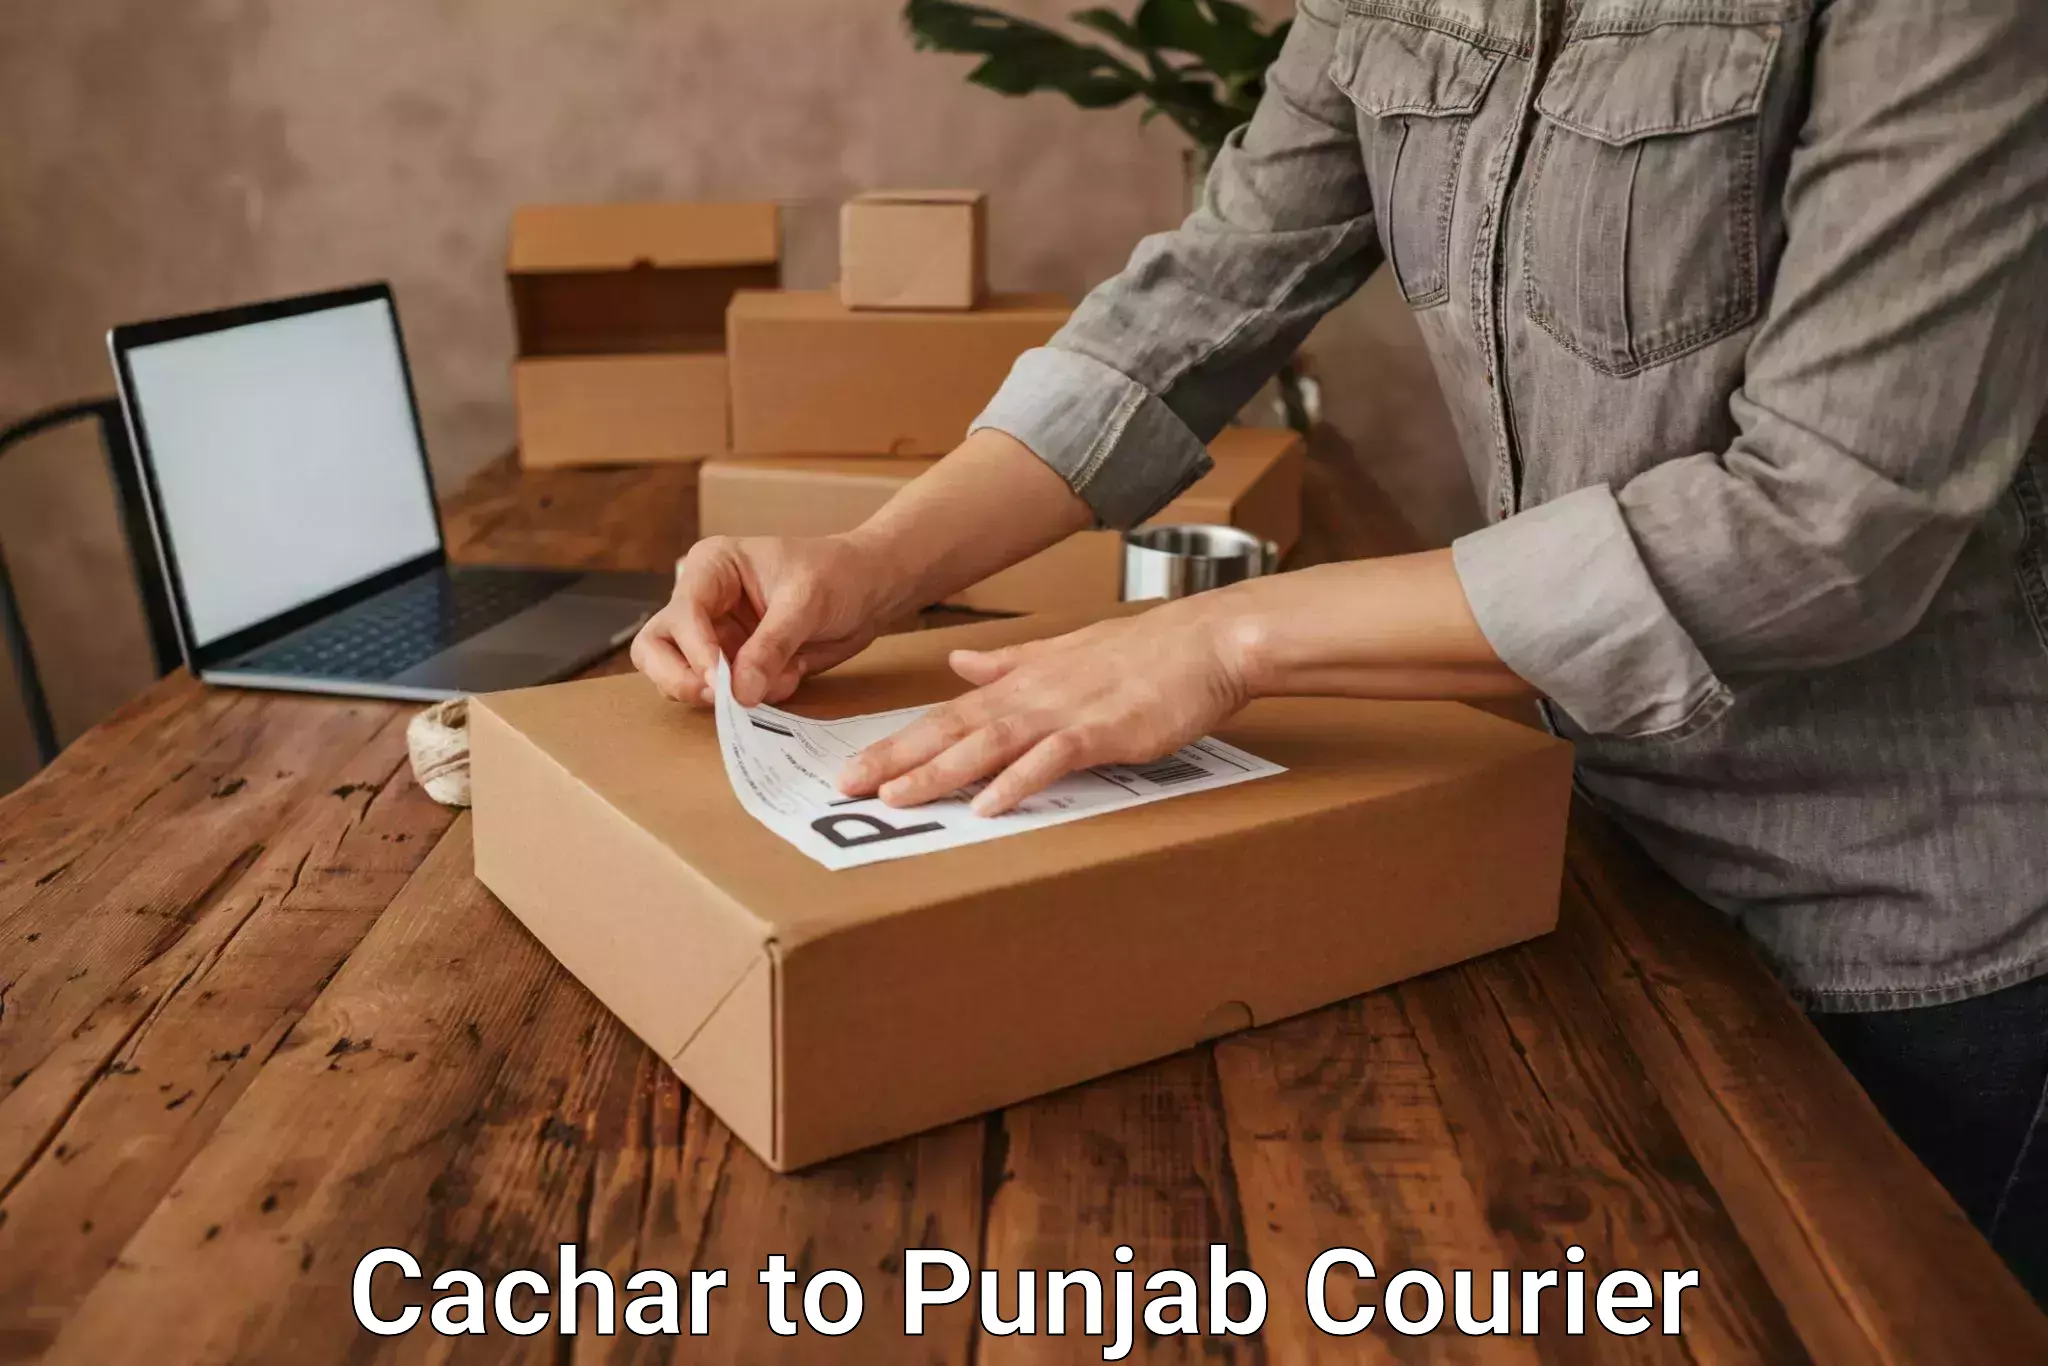 Automated shipping processes Cachar to Ludhiana